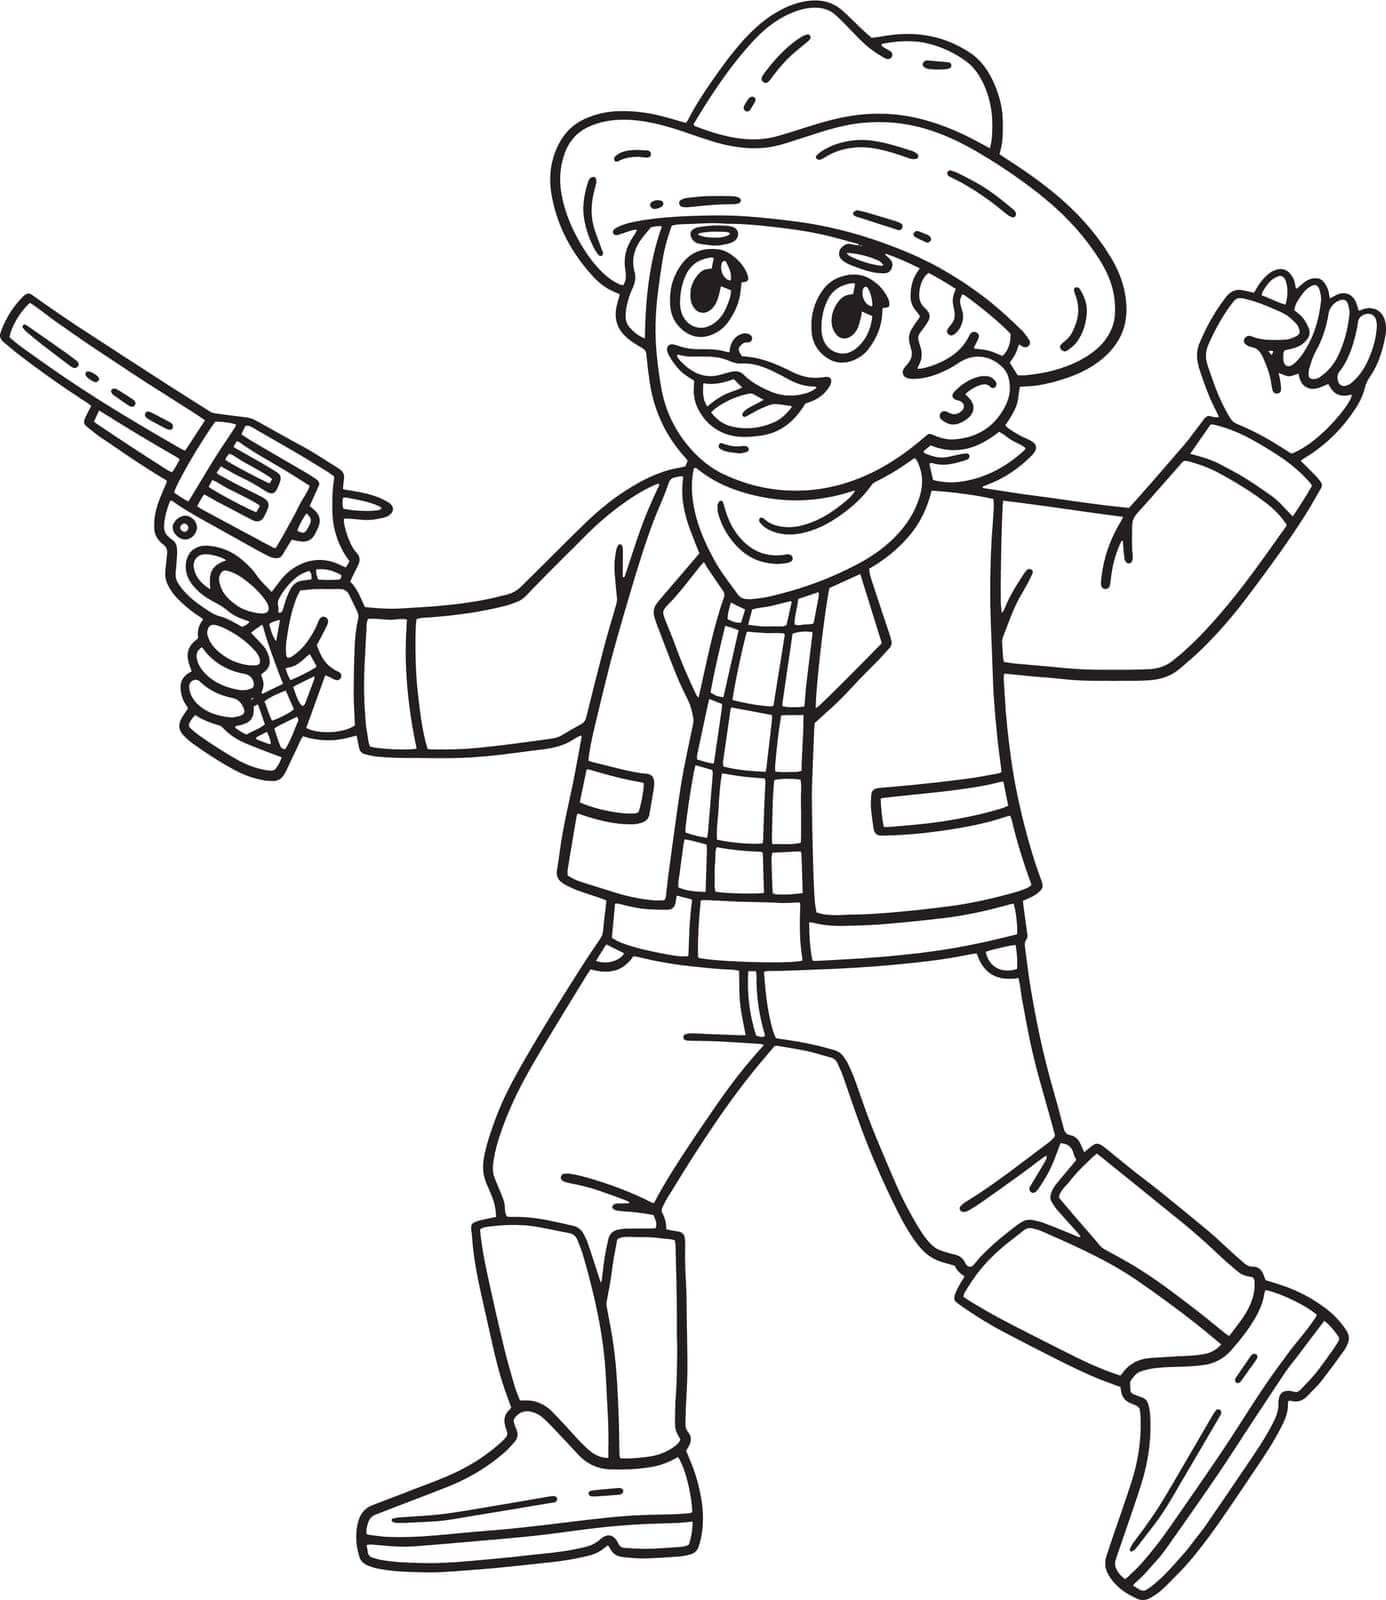 A cute and funny coloring page of a Cowboy with Gun. Provides hours of coloring fun for children. To color, this page is very easy. Suitable for little kids and toddlers.